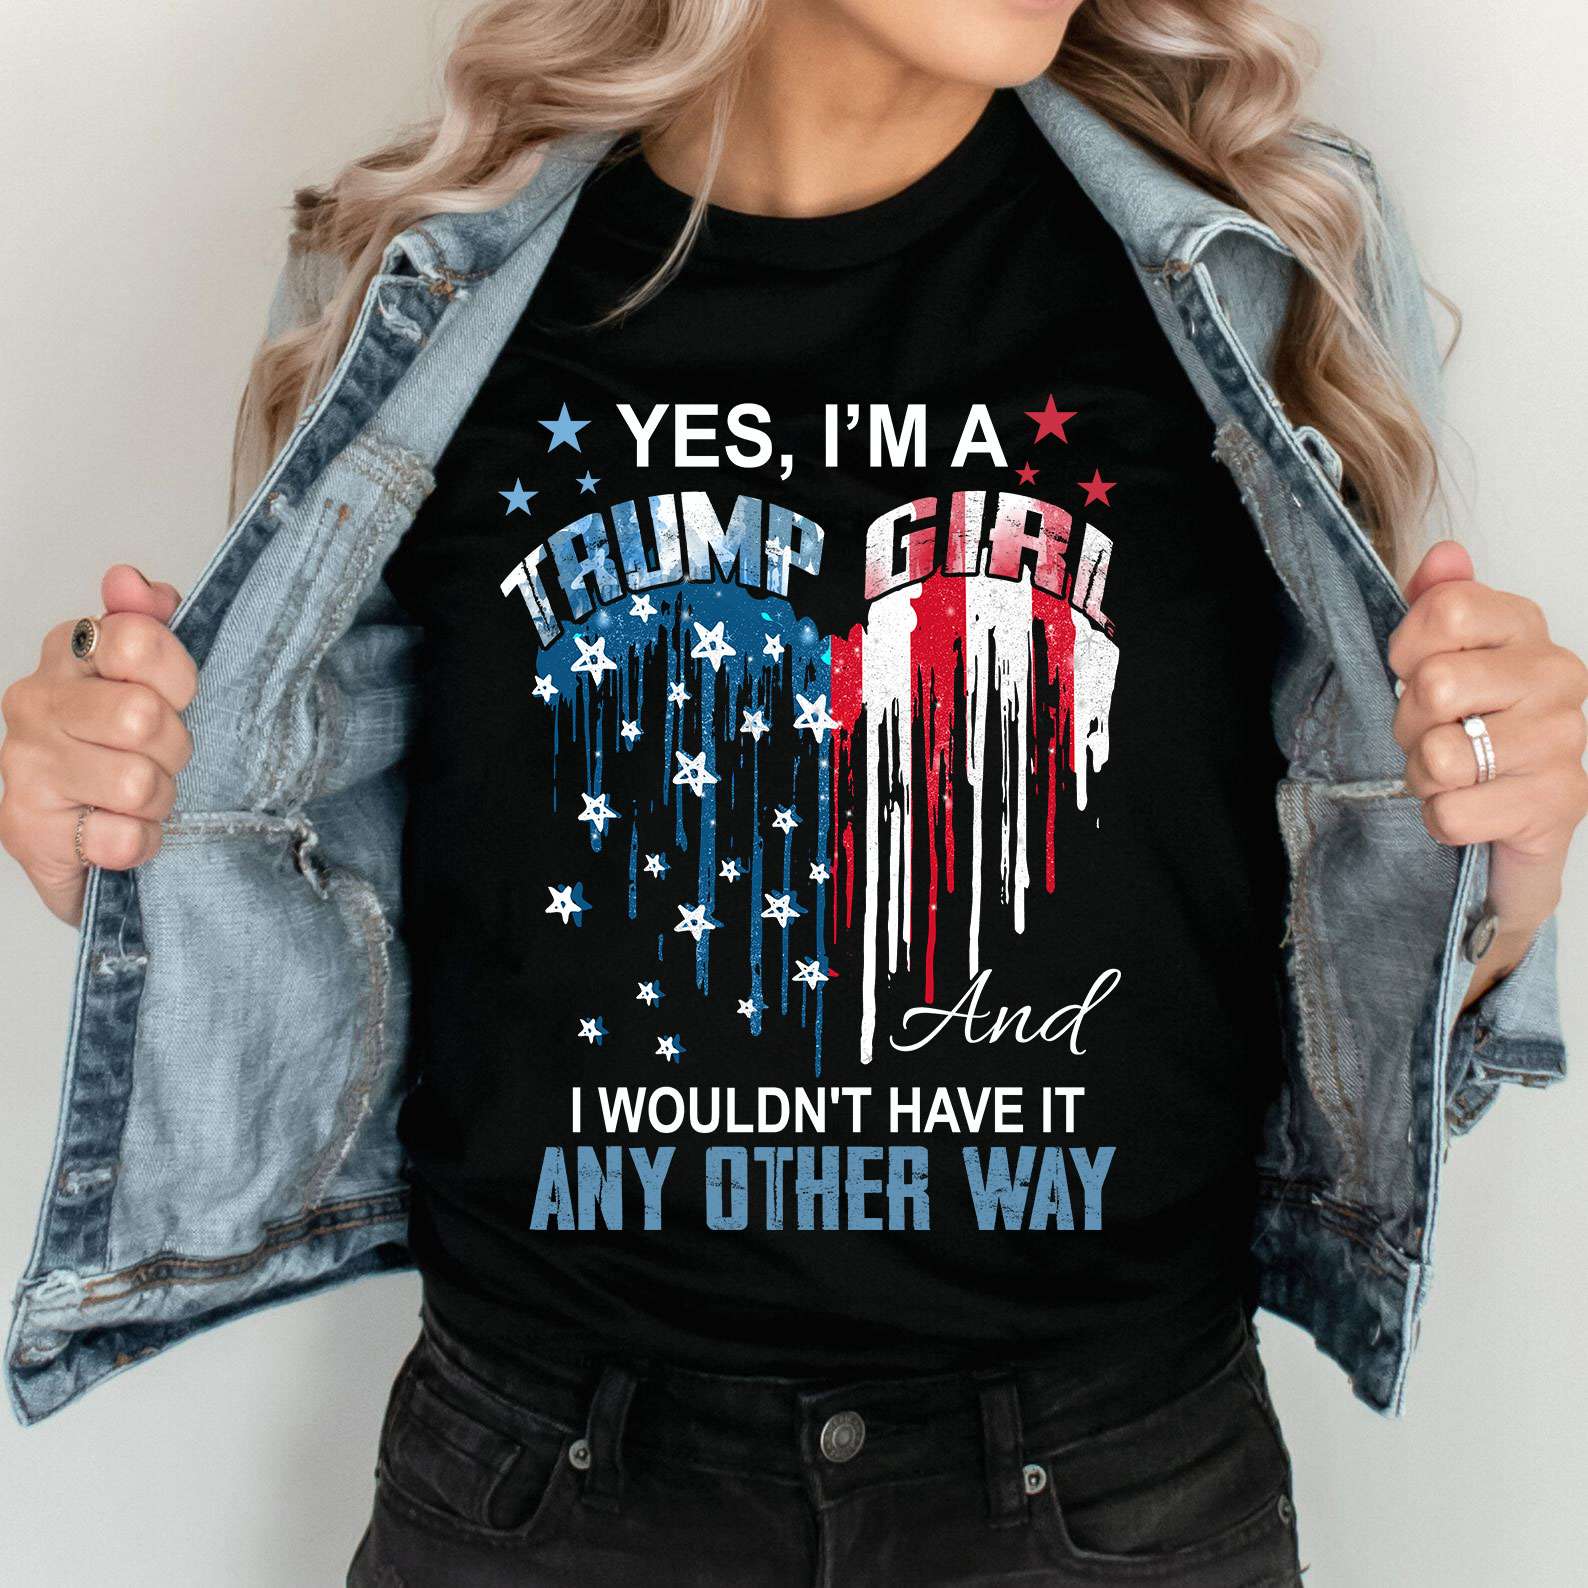 Yes, I'm a Trump girl and I wouldn't have it any other way - Supporting Donald Trump, America president